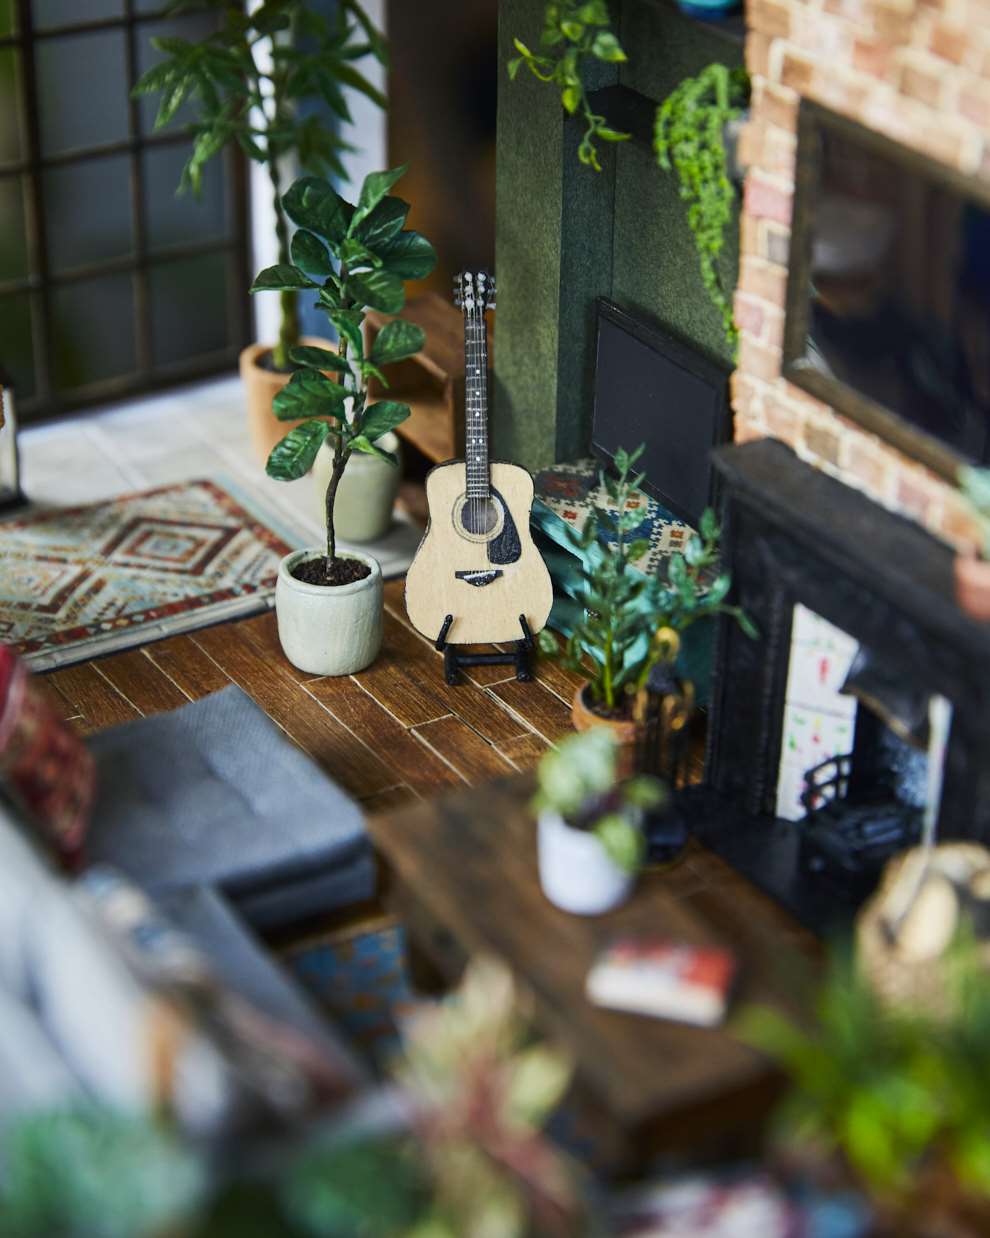 Hannah Lemon, Miniature detailed set design. Living room with a fireplace, guitar, TV, and coffee table surrounded by houseplants and botanicals. Tiny sculpture made from air drying clay, paper, wood, paint, mixed media. 